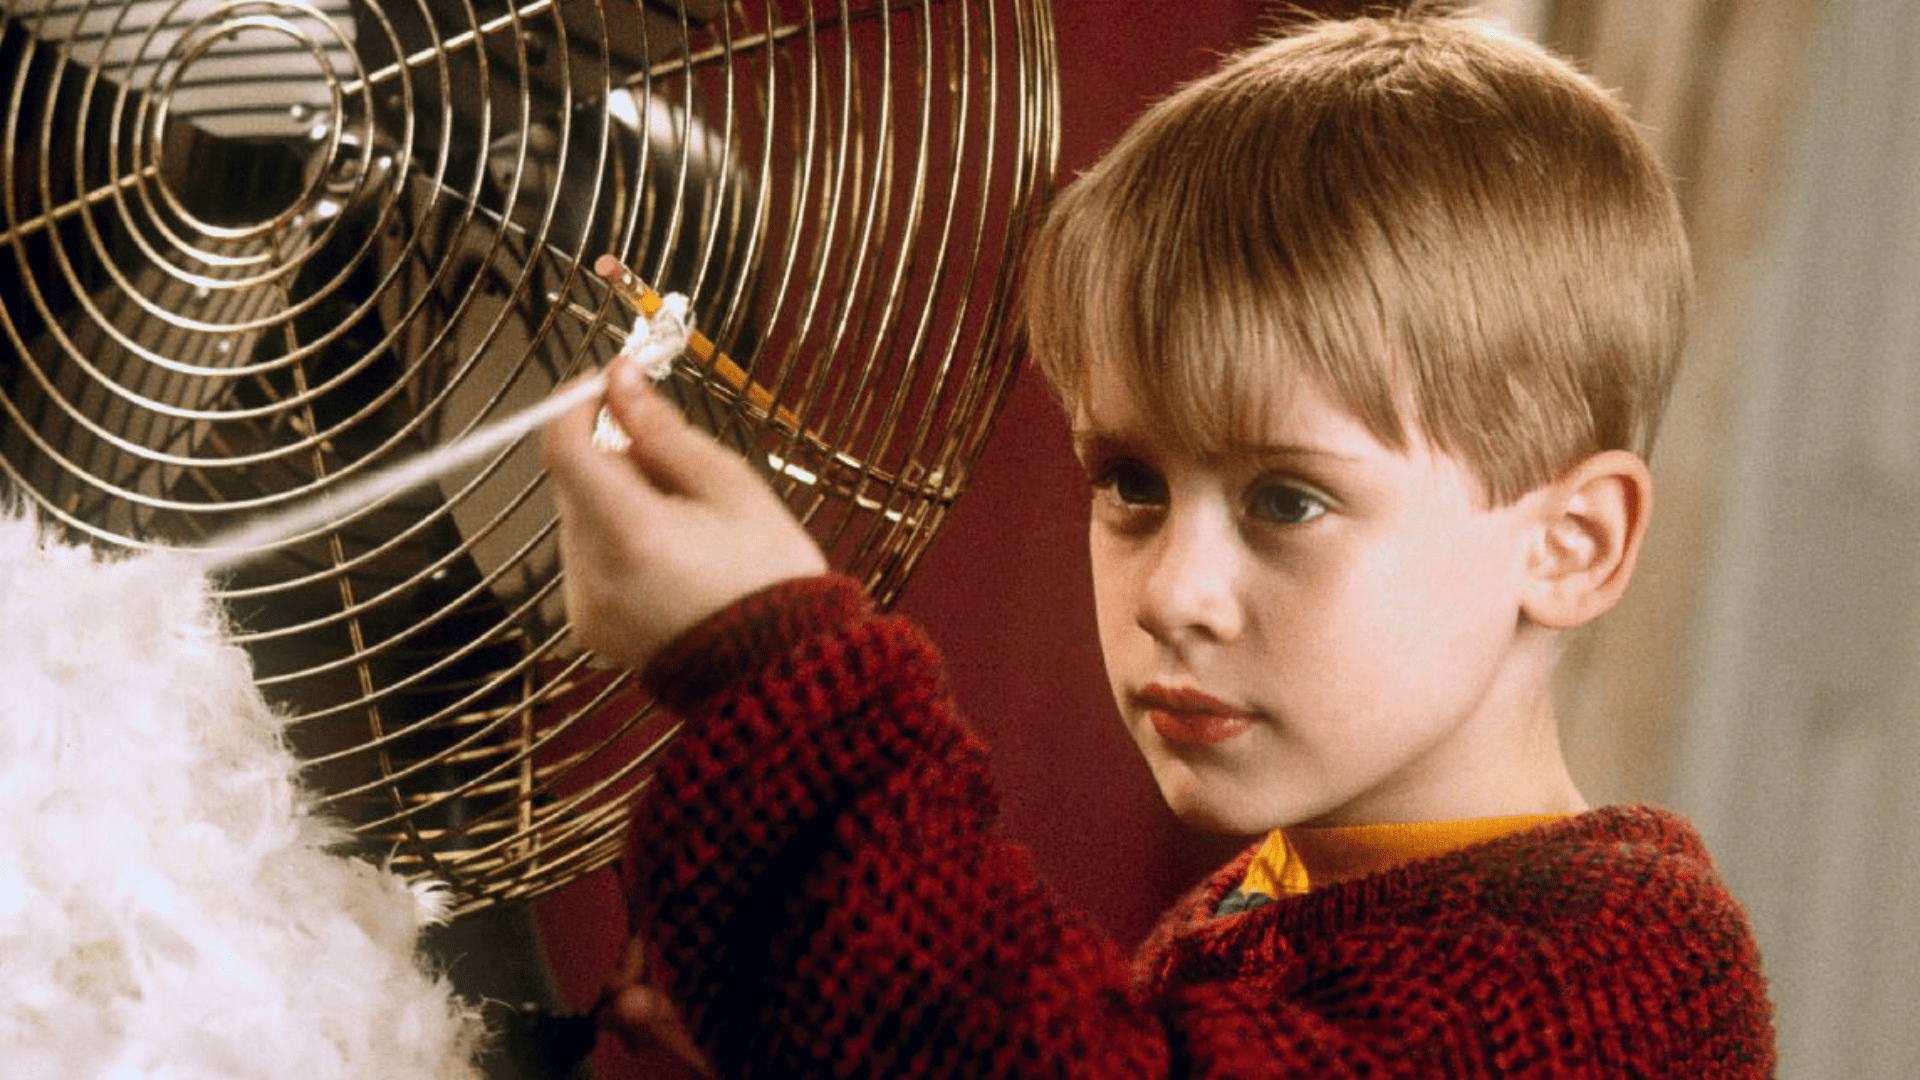 Home Alone Facts - 83 Home Alone (1990) Facts To Get You In The Christmas Spirit